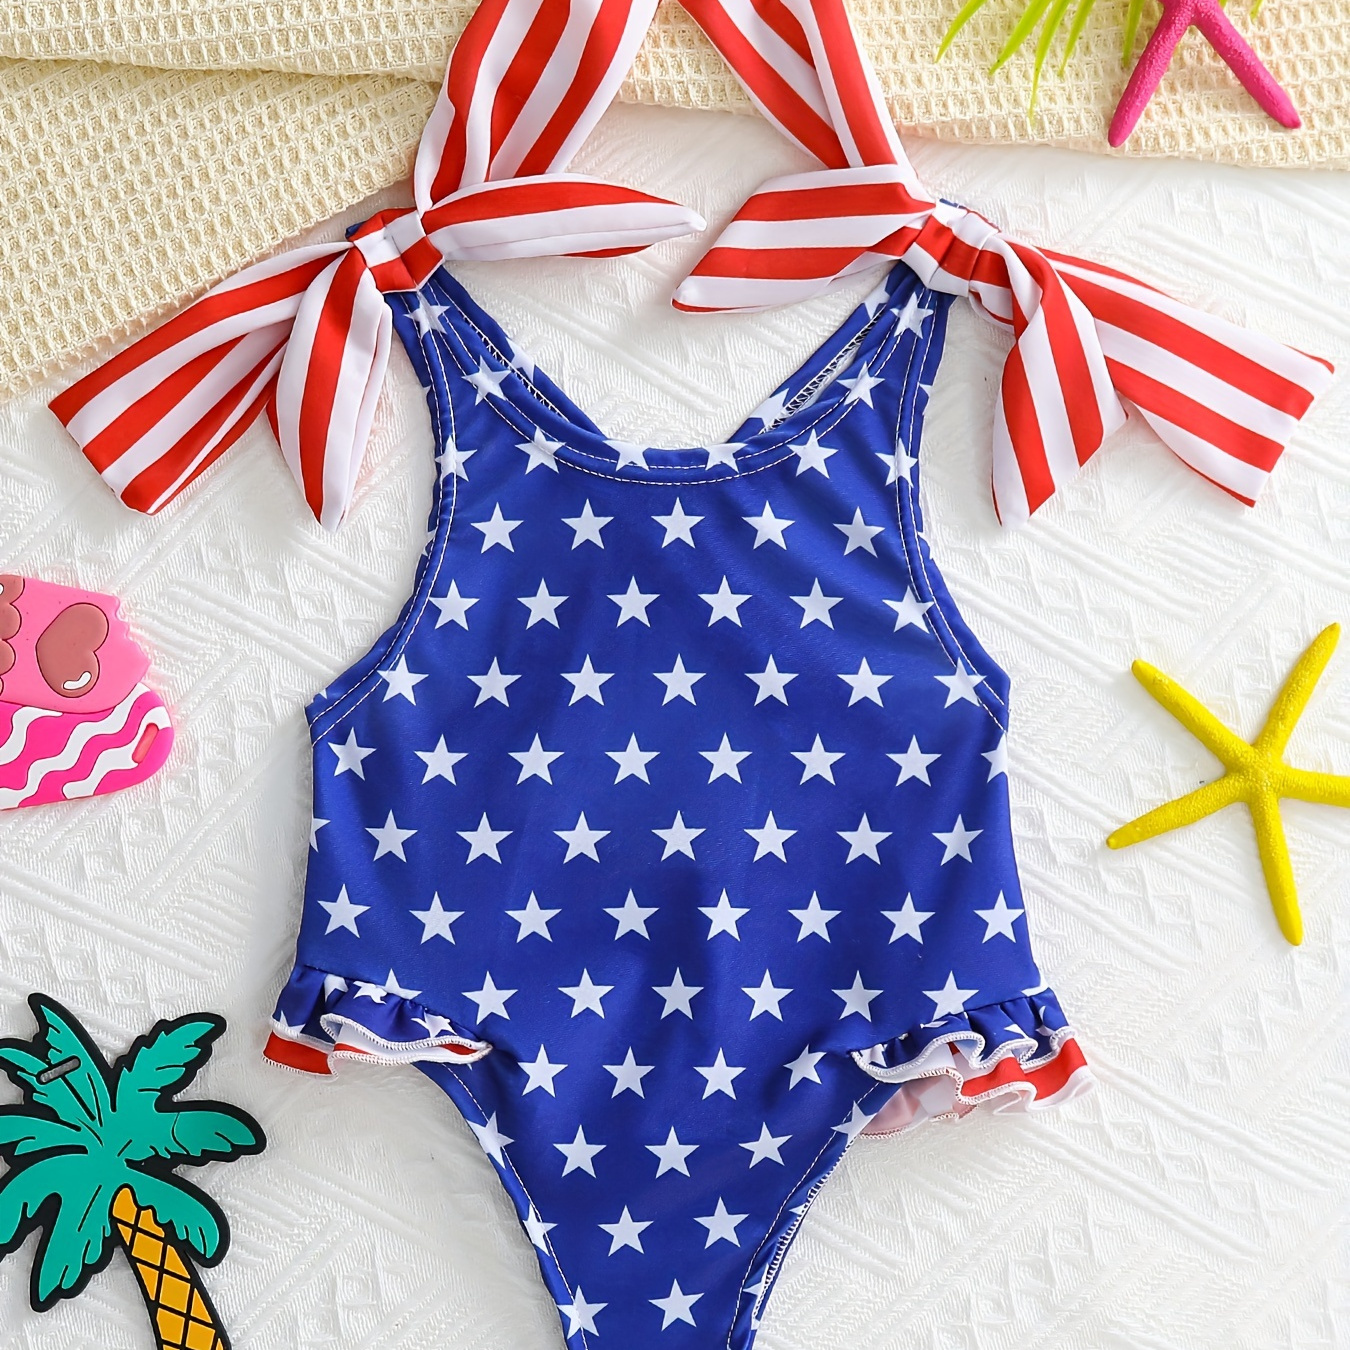 

Toddler's Pentagram Pattern Sleeveless One-piece Swimsuit, Trendy Criss-cross Design Stretchy Bathing Suit, Baby Girl's Swimwear For Summer Beach Holiday Independence Day